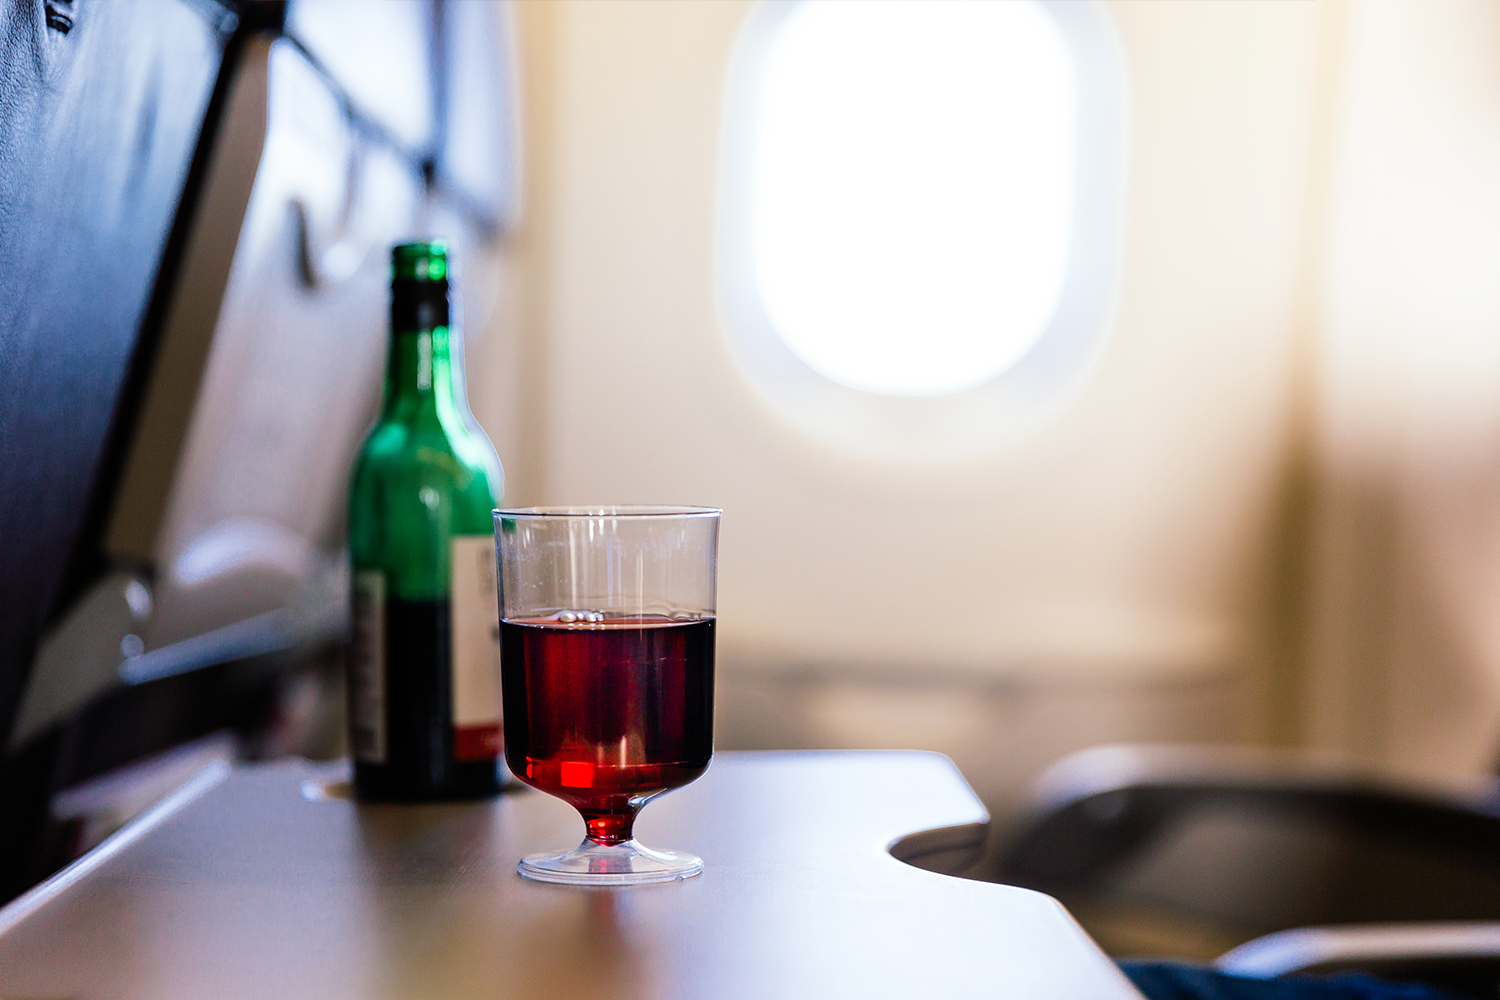 American Airlines Is Extending Their In-Flight Alcohol Ban … But Only in Economy